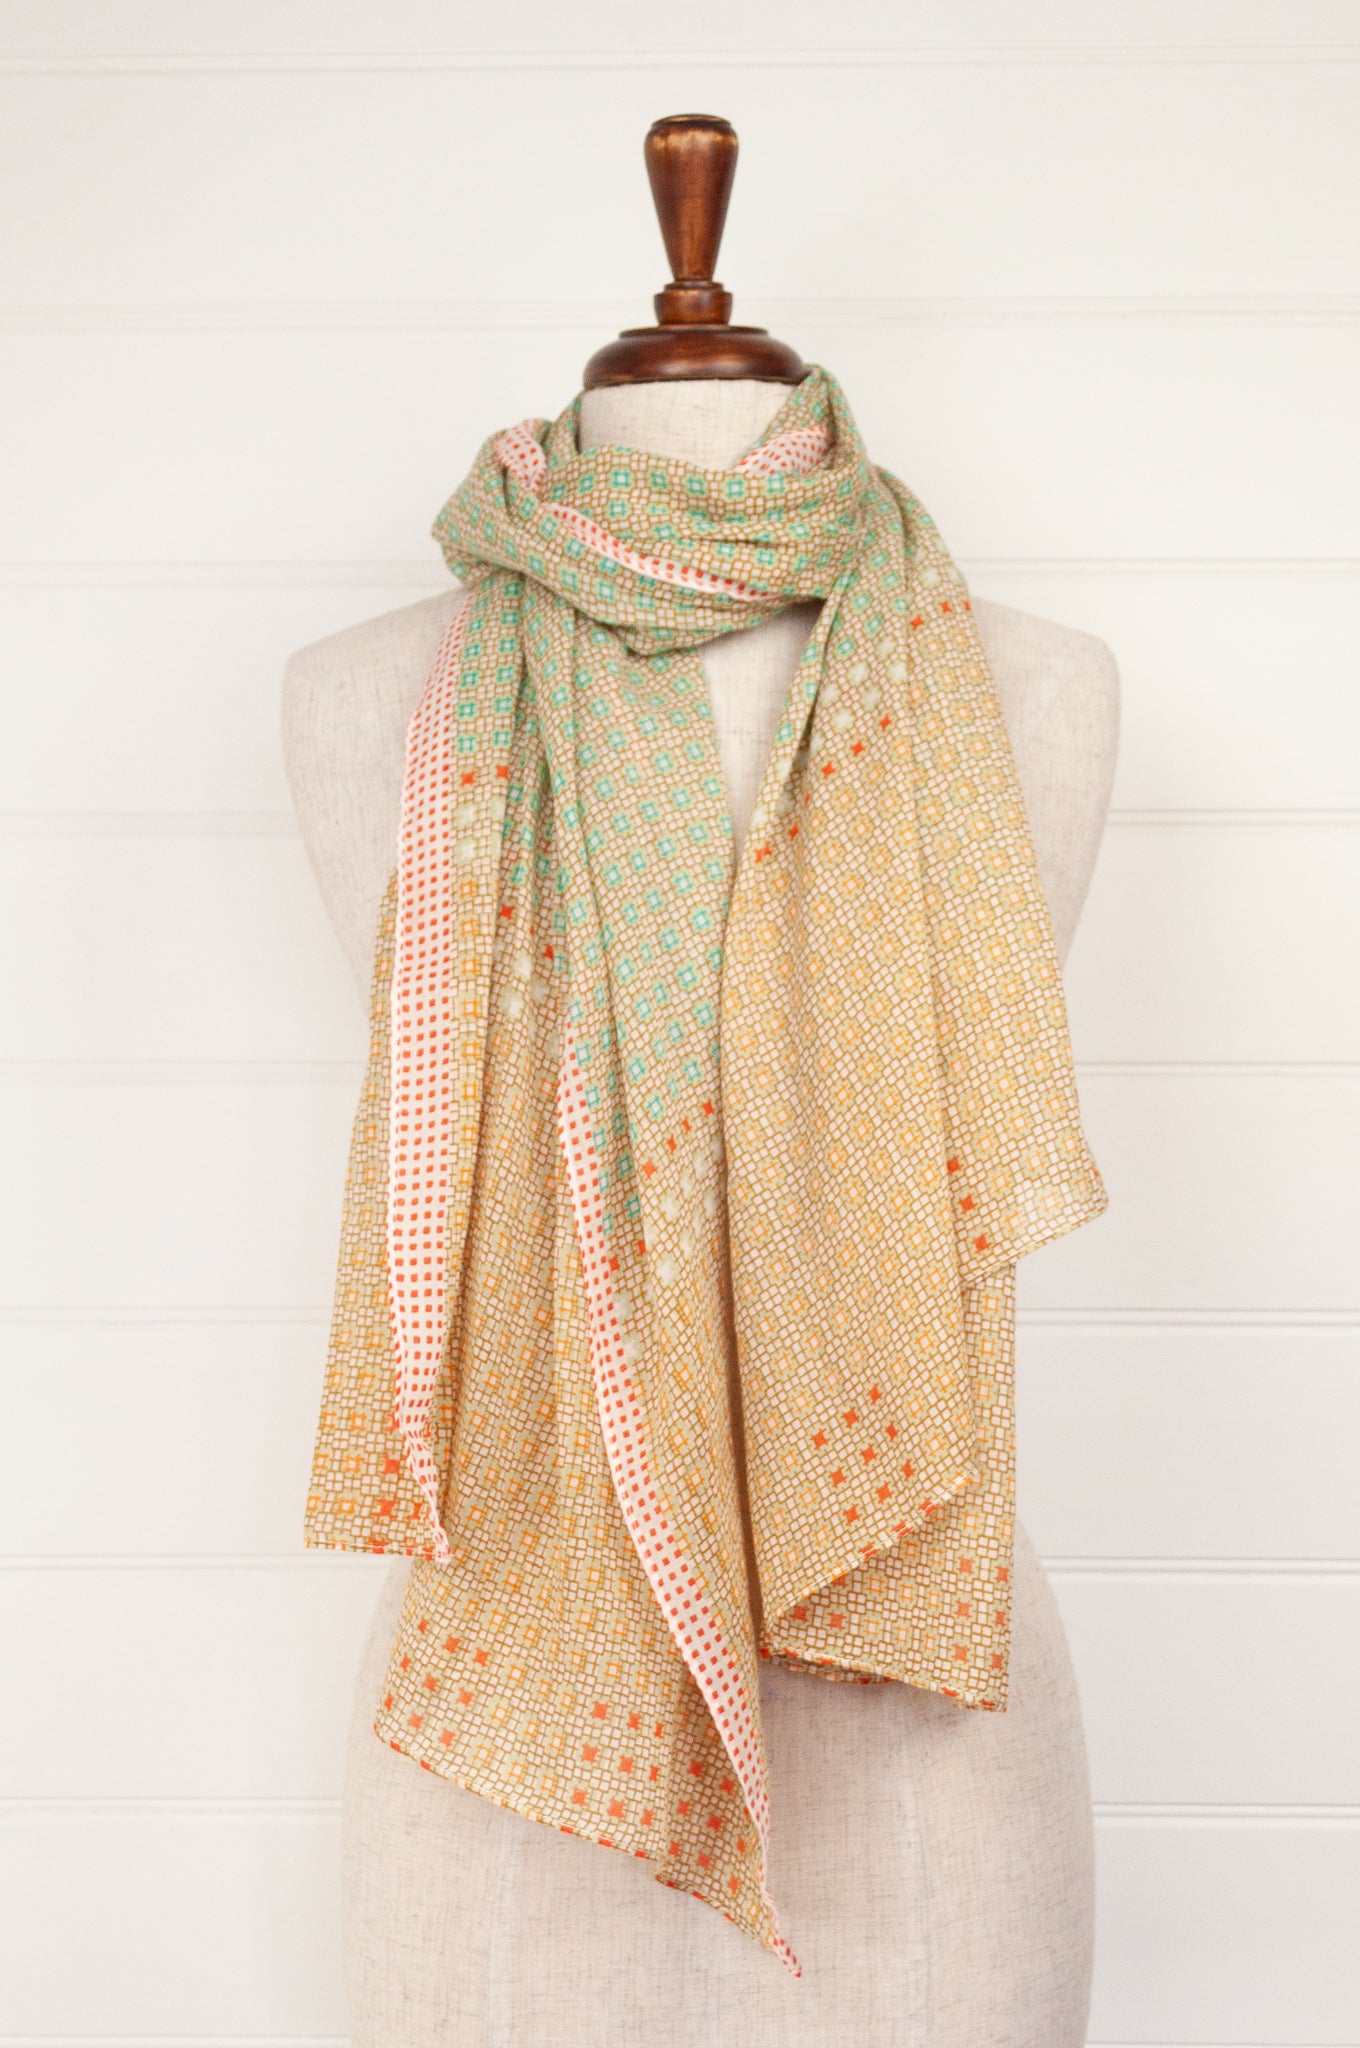 Anna Kaszer fine cotton voile scarf, geometric pattern in pale aqua, taupe and red geometric design.